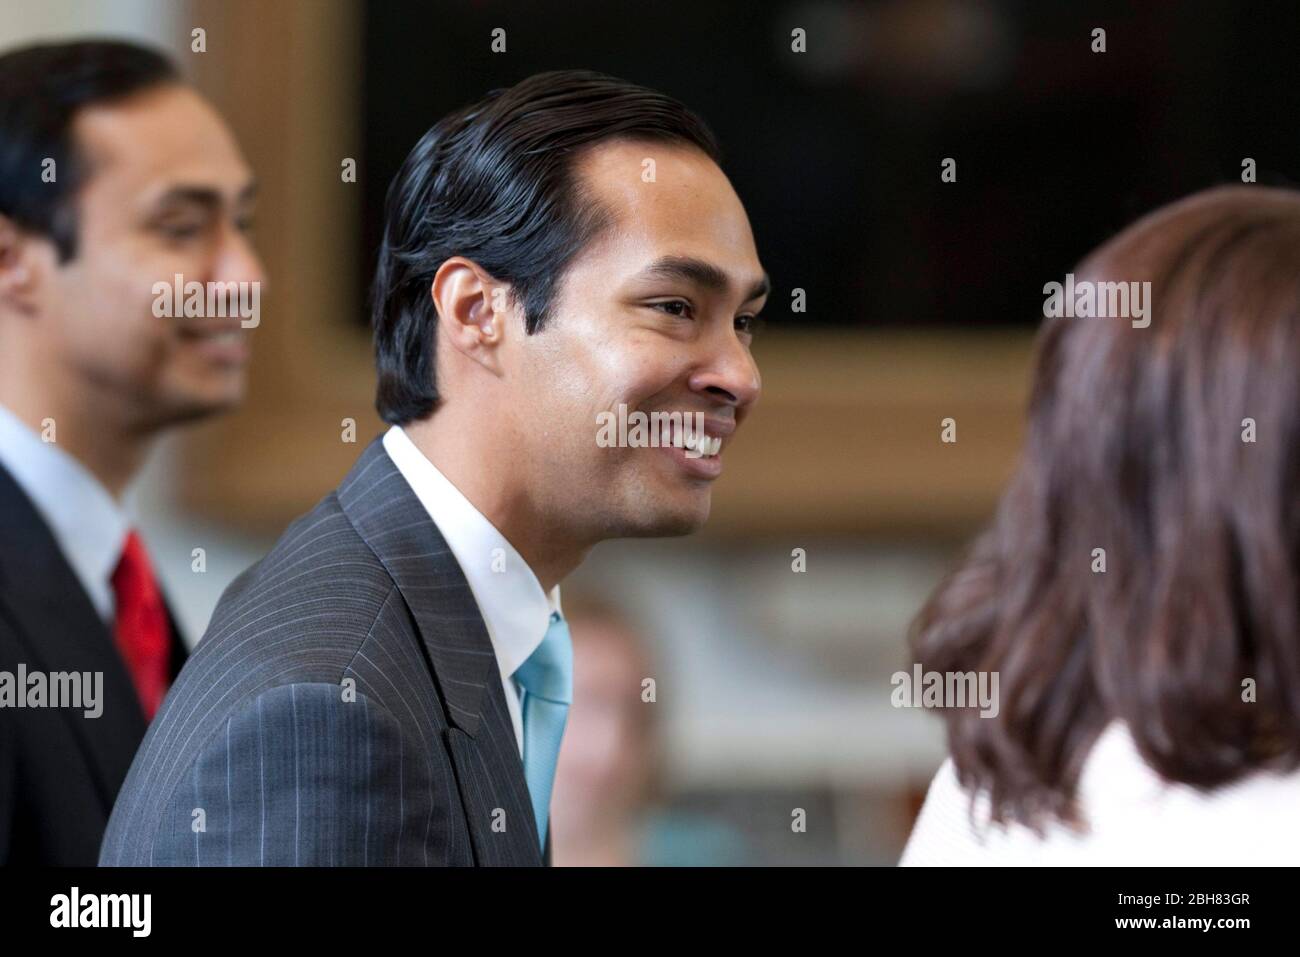 Austin Texas USA, May 27, 2009: Newly-elected mayor of San Antonio, Julian Castro, visits with legislators at the Texas Capitol following his spring election victory. Castro's identical twin brother, Joaquin (left), is a state representative from San Antonio. ©Bob Daemmrich Stock Photo